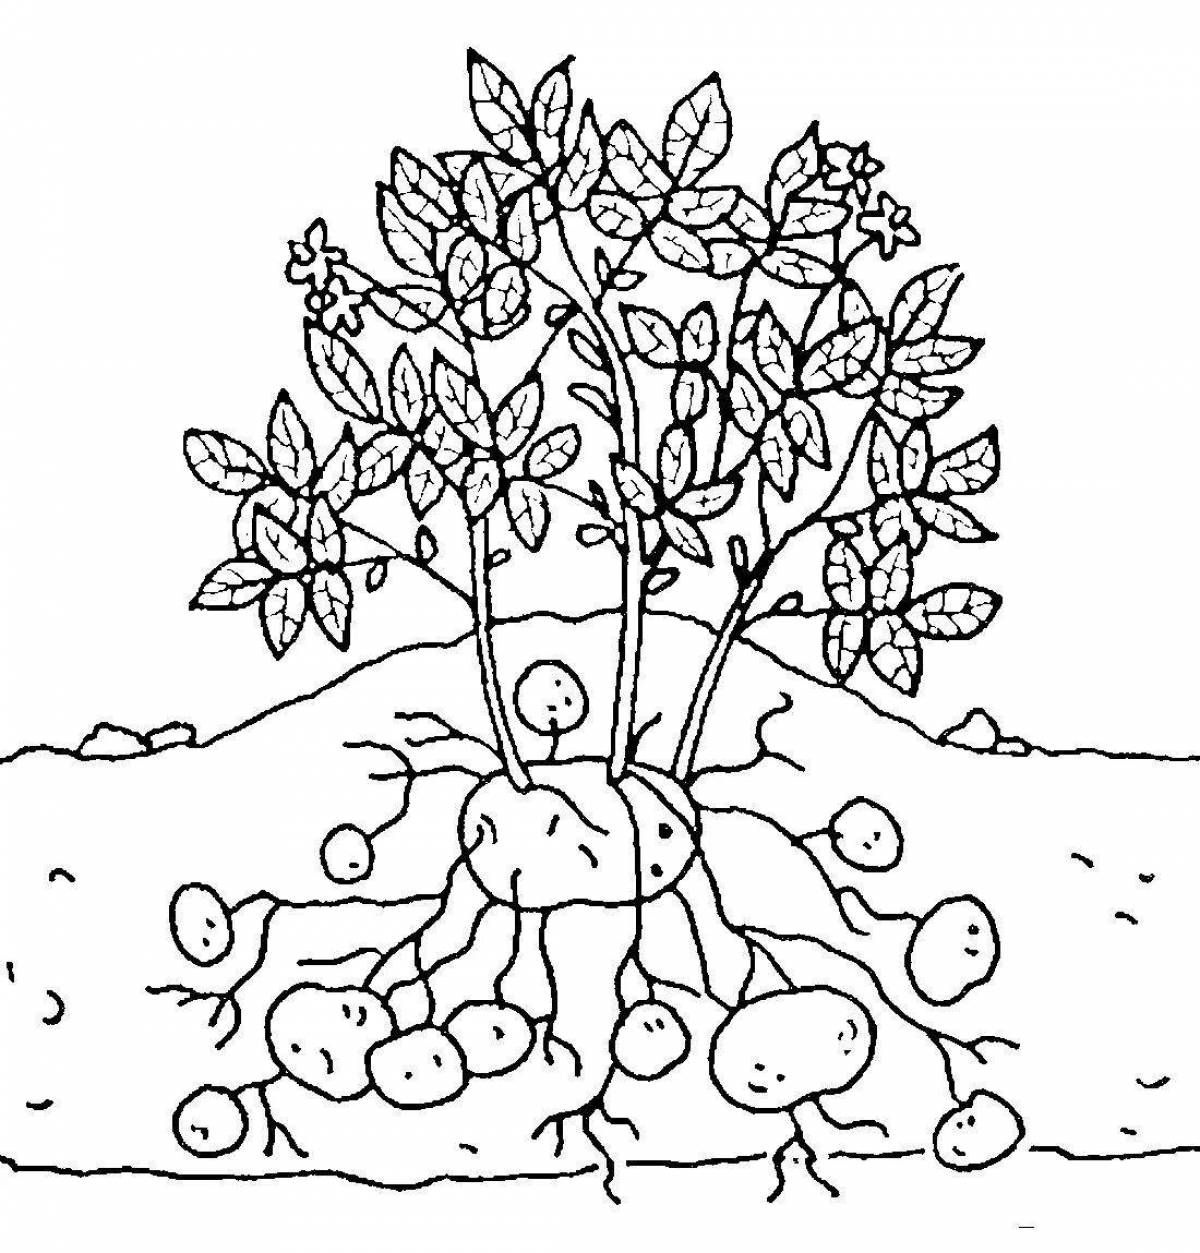 Bright soil coloring page